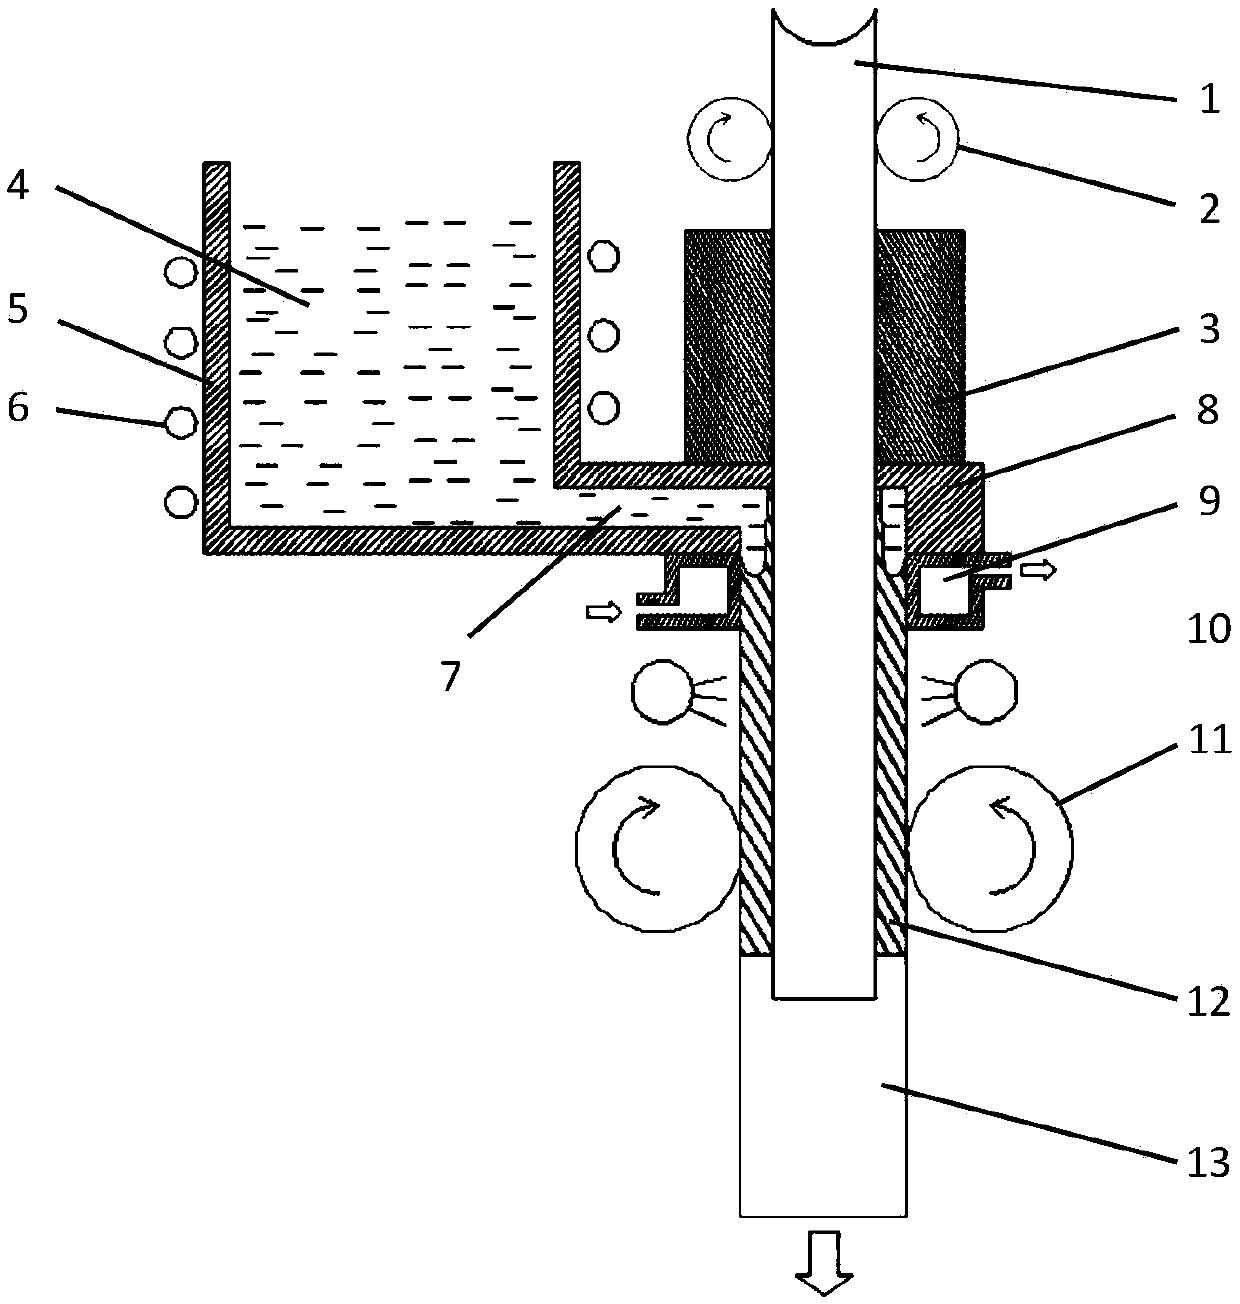 Equipment and method for solid/liquid composite continuous casting of coating materials